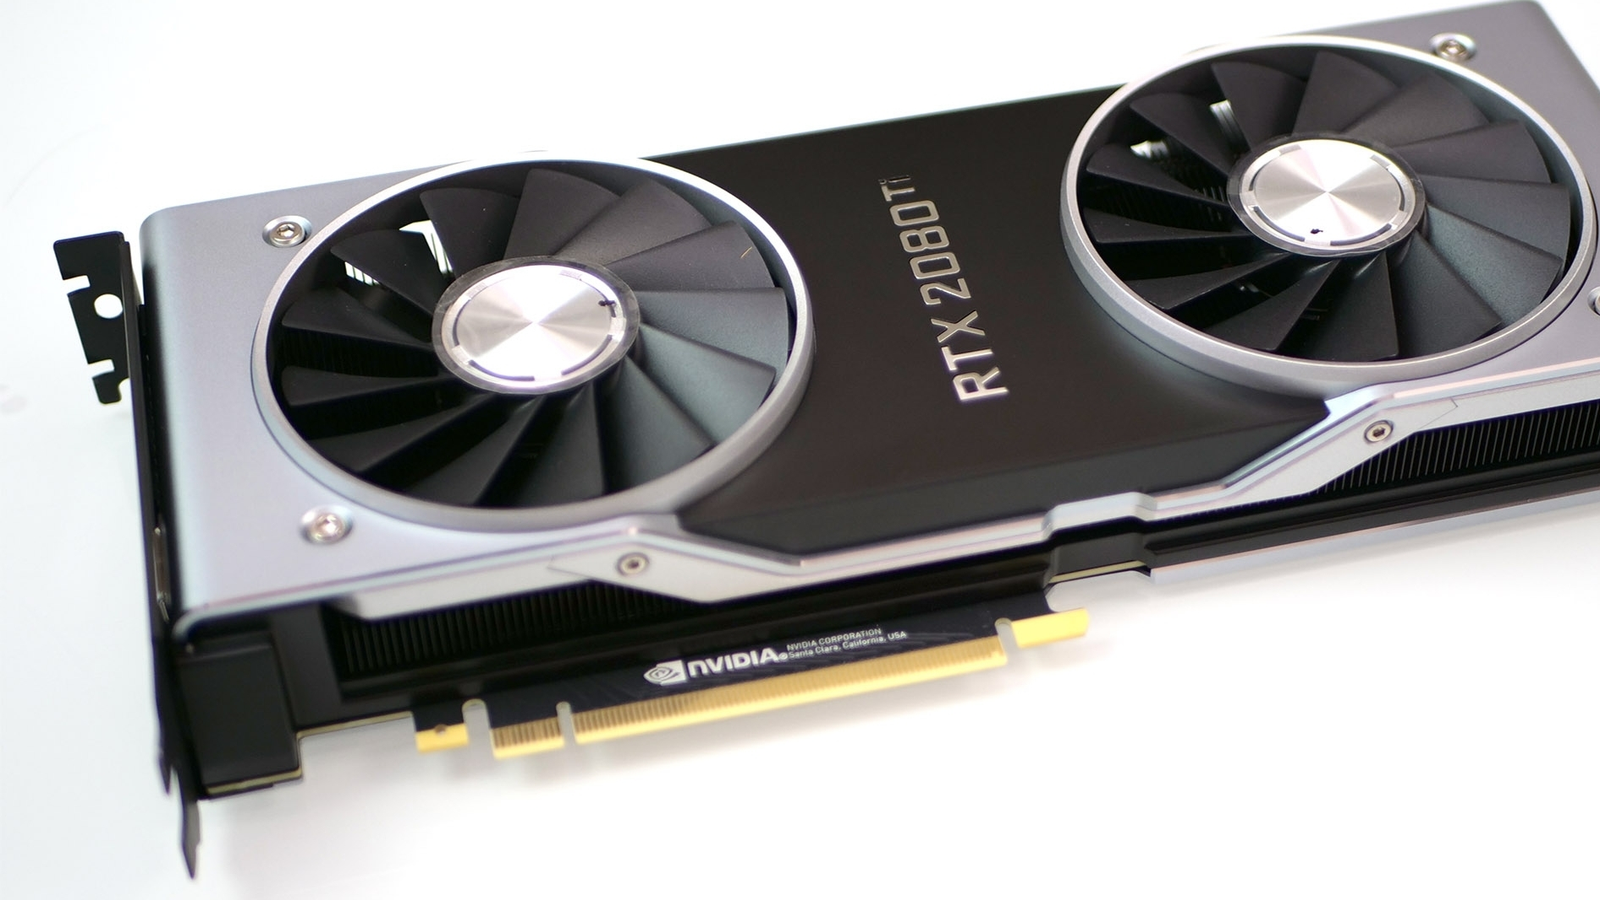 Nvidia Geforce RTX 2080 Benchmarks: 18 Games Tested and Here Are the Results